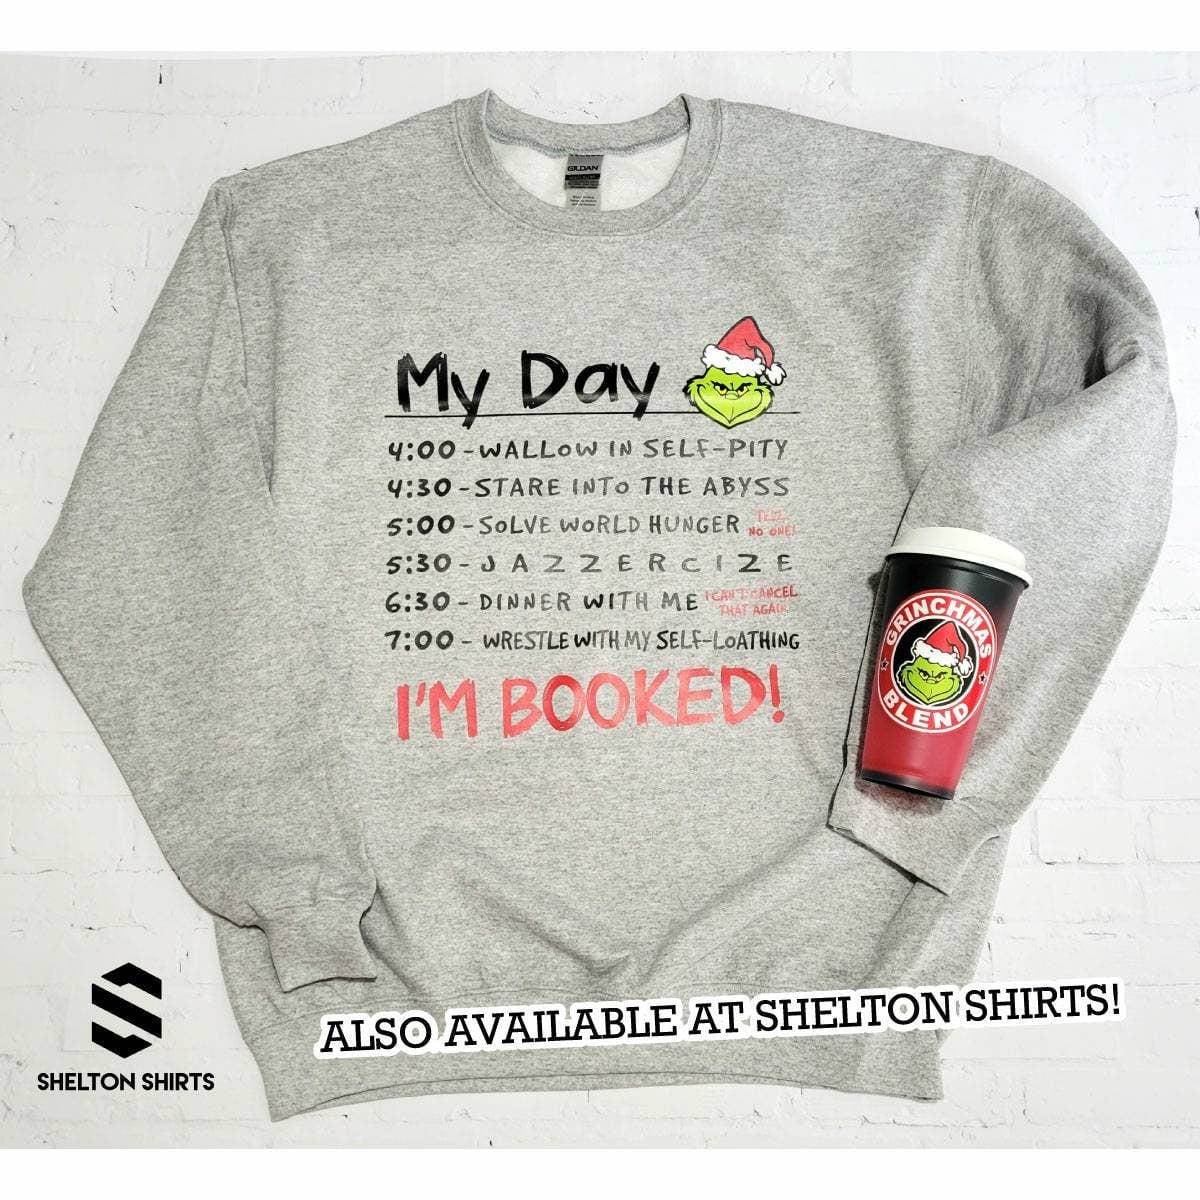 4:00 Wallow in Self Pity Daily Routine The Grinch Quote Crew Neck Heather Grey Unisex Sweatshirt Shelton Shirts